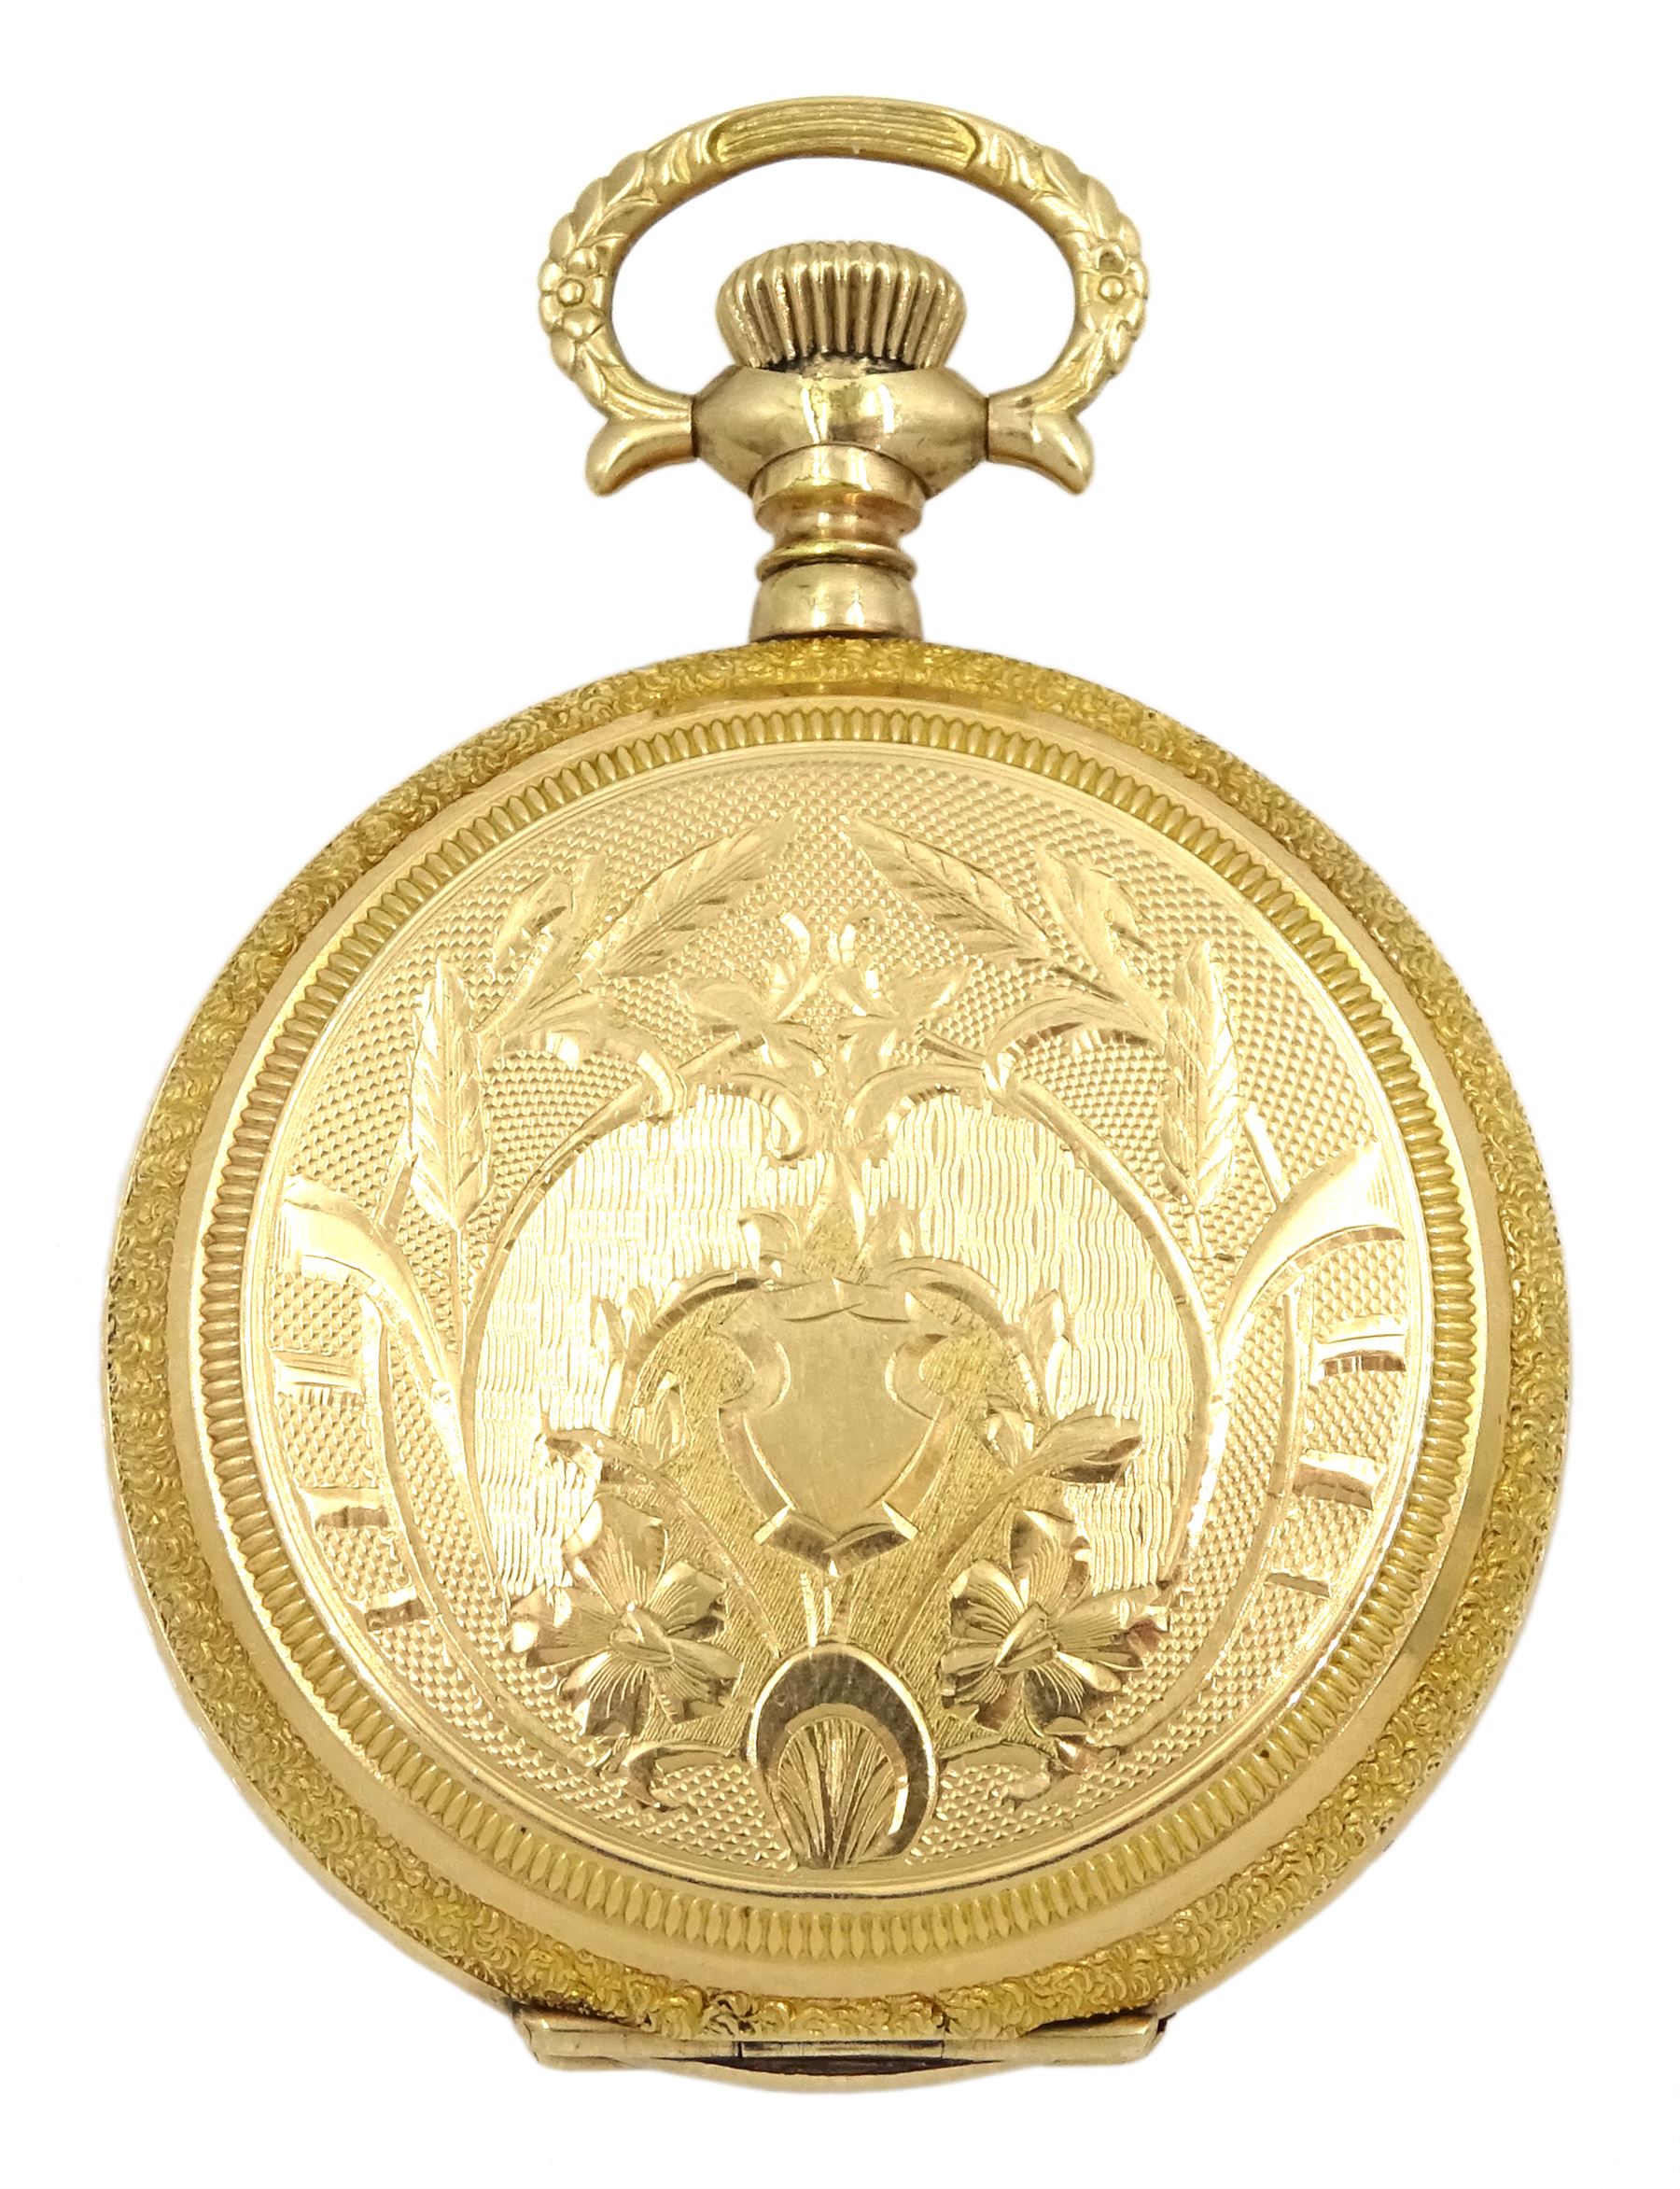 Early 20th century gold full hunter lever fob watch by Elgin - Image 2 of 4